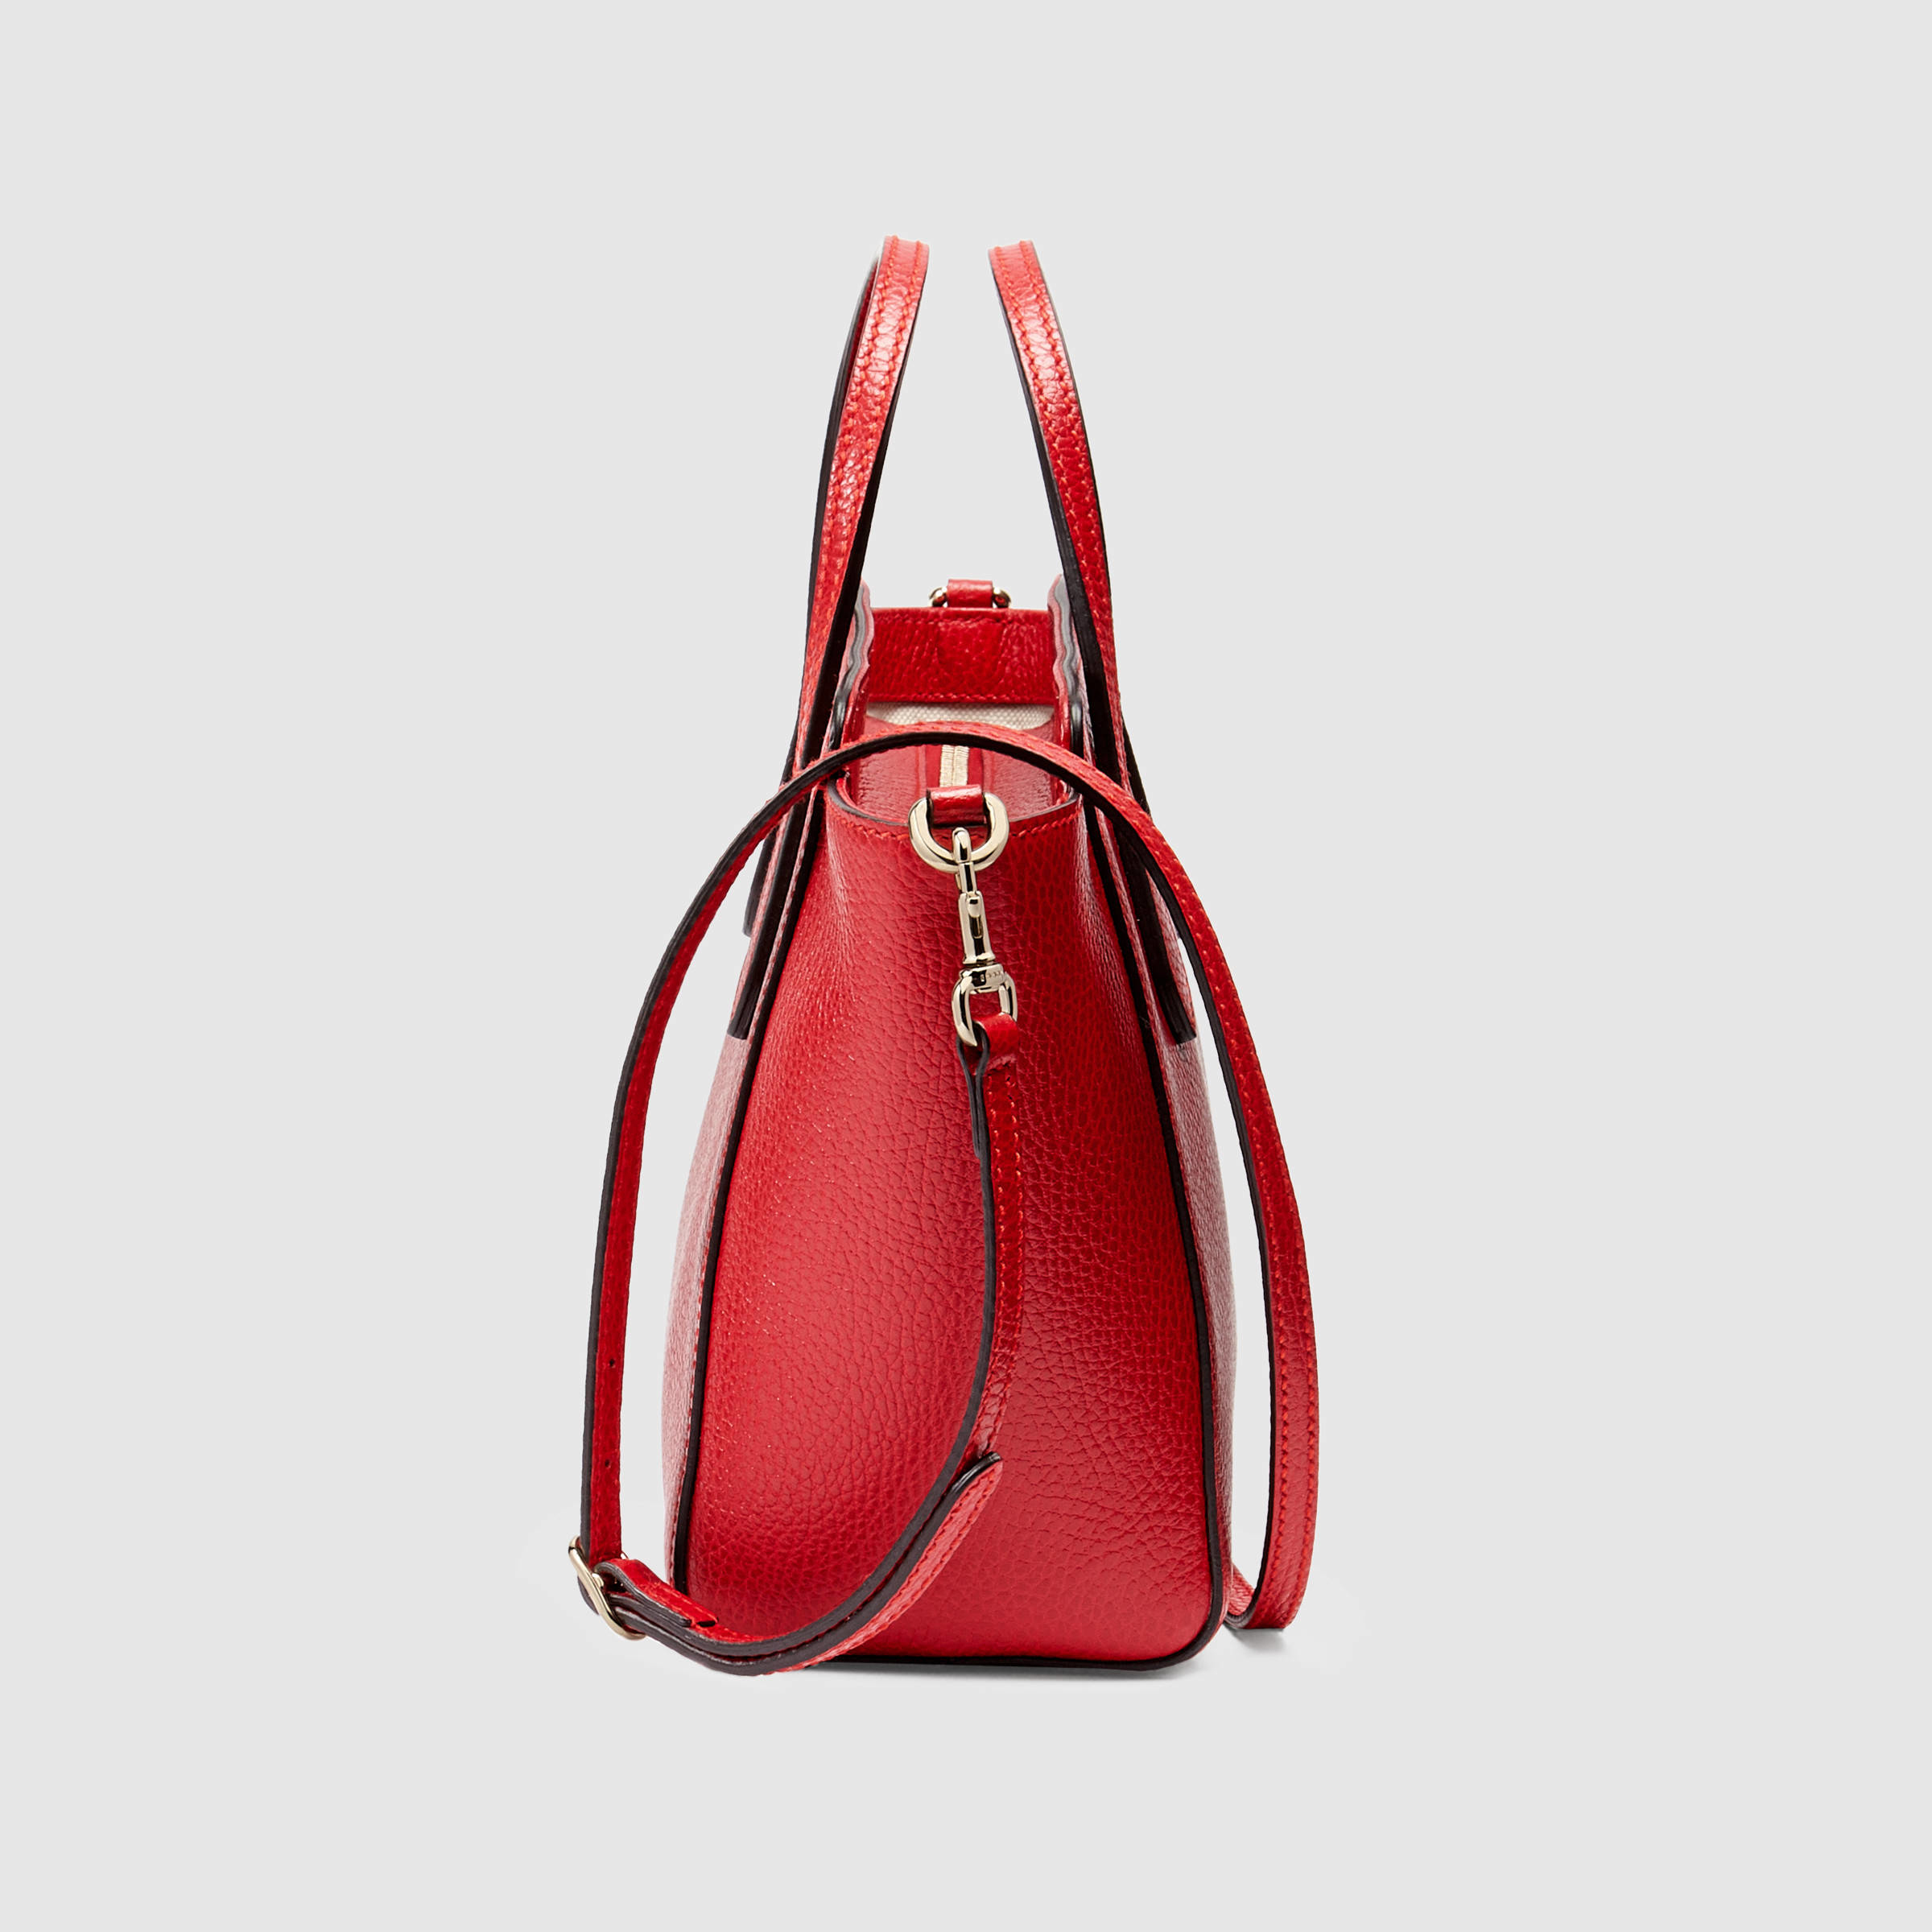 Gucci Swing Leather Mini Bag in Red (red leather) | Lyst